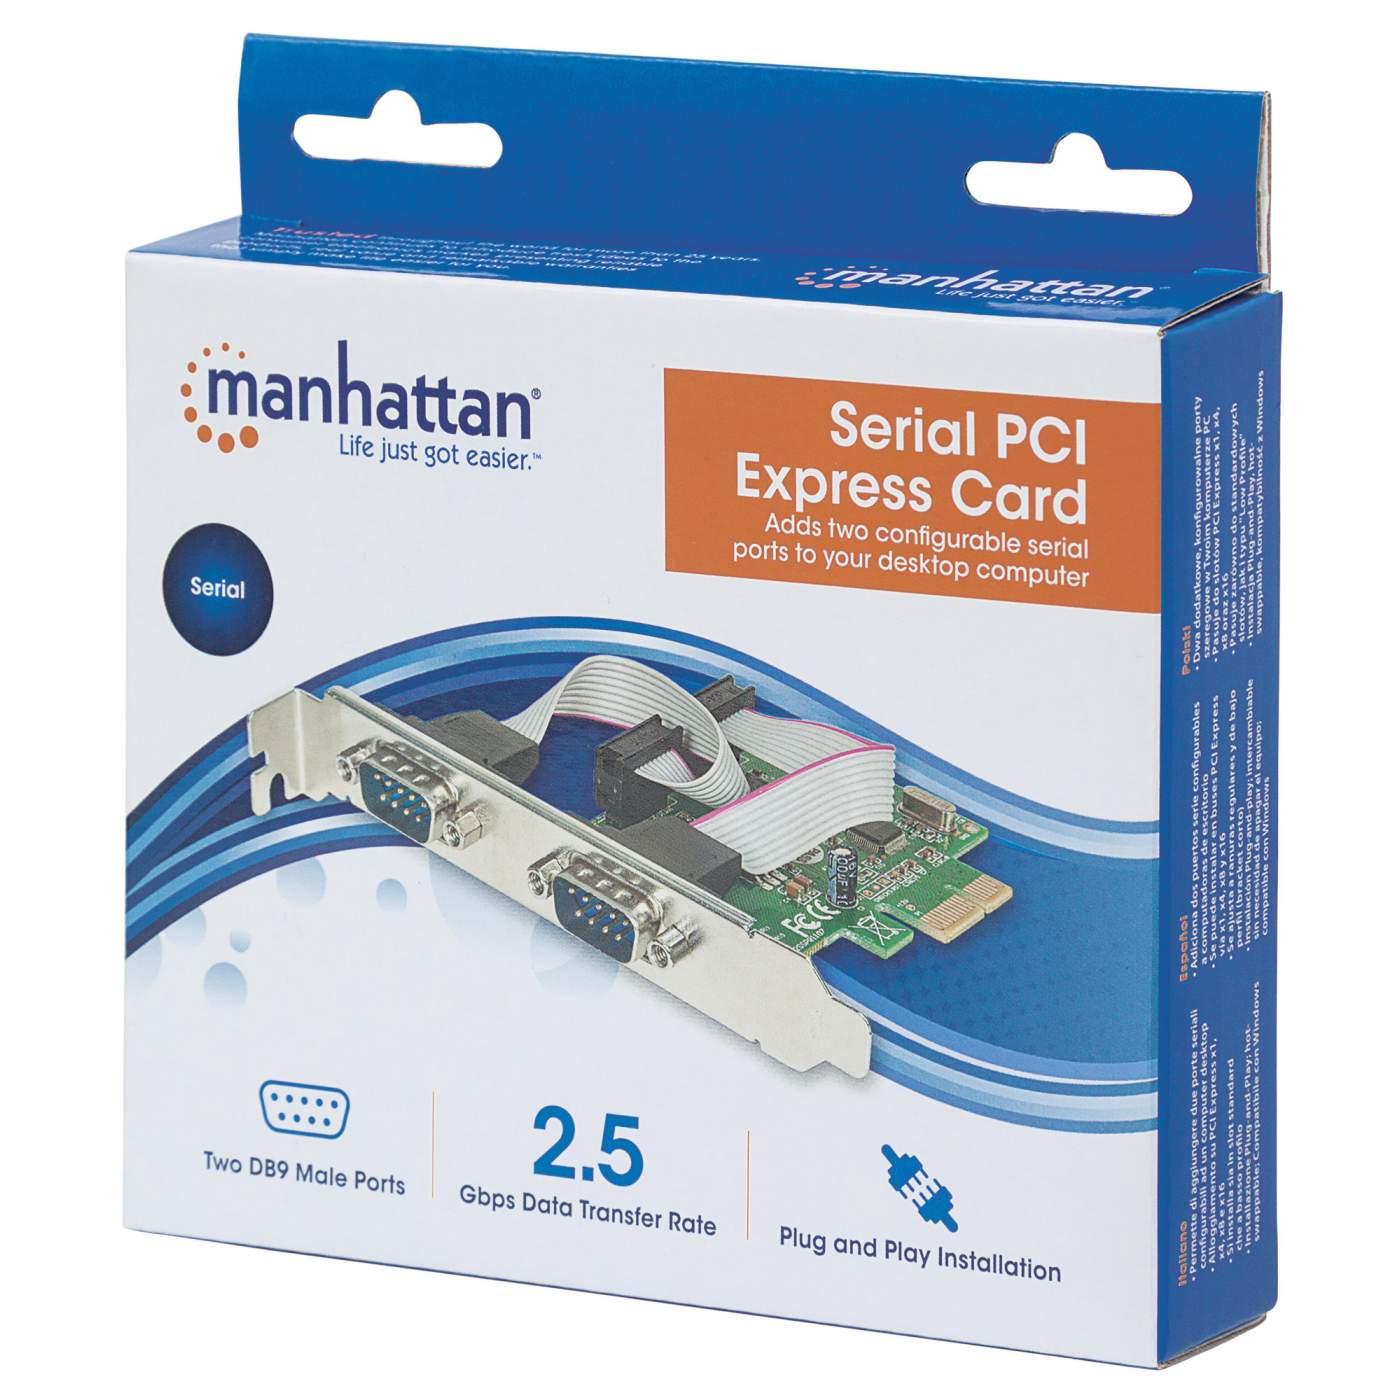 Serial PCI Express Card Packaging Image 2